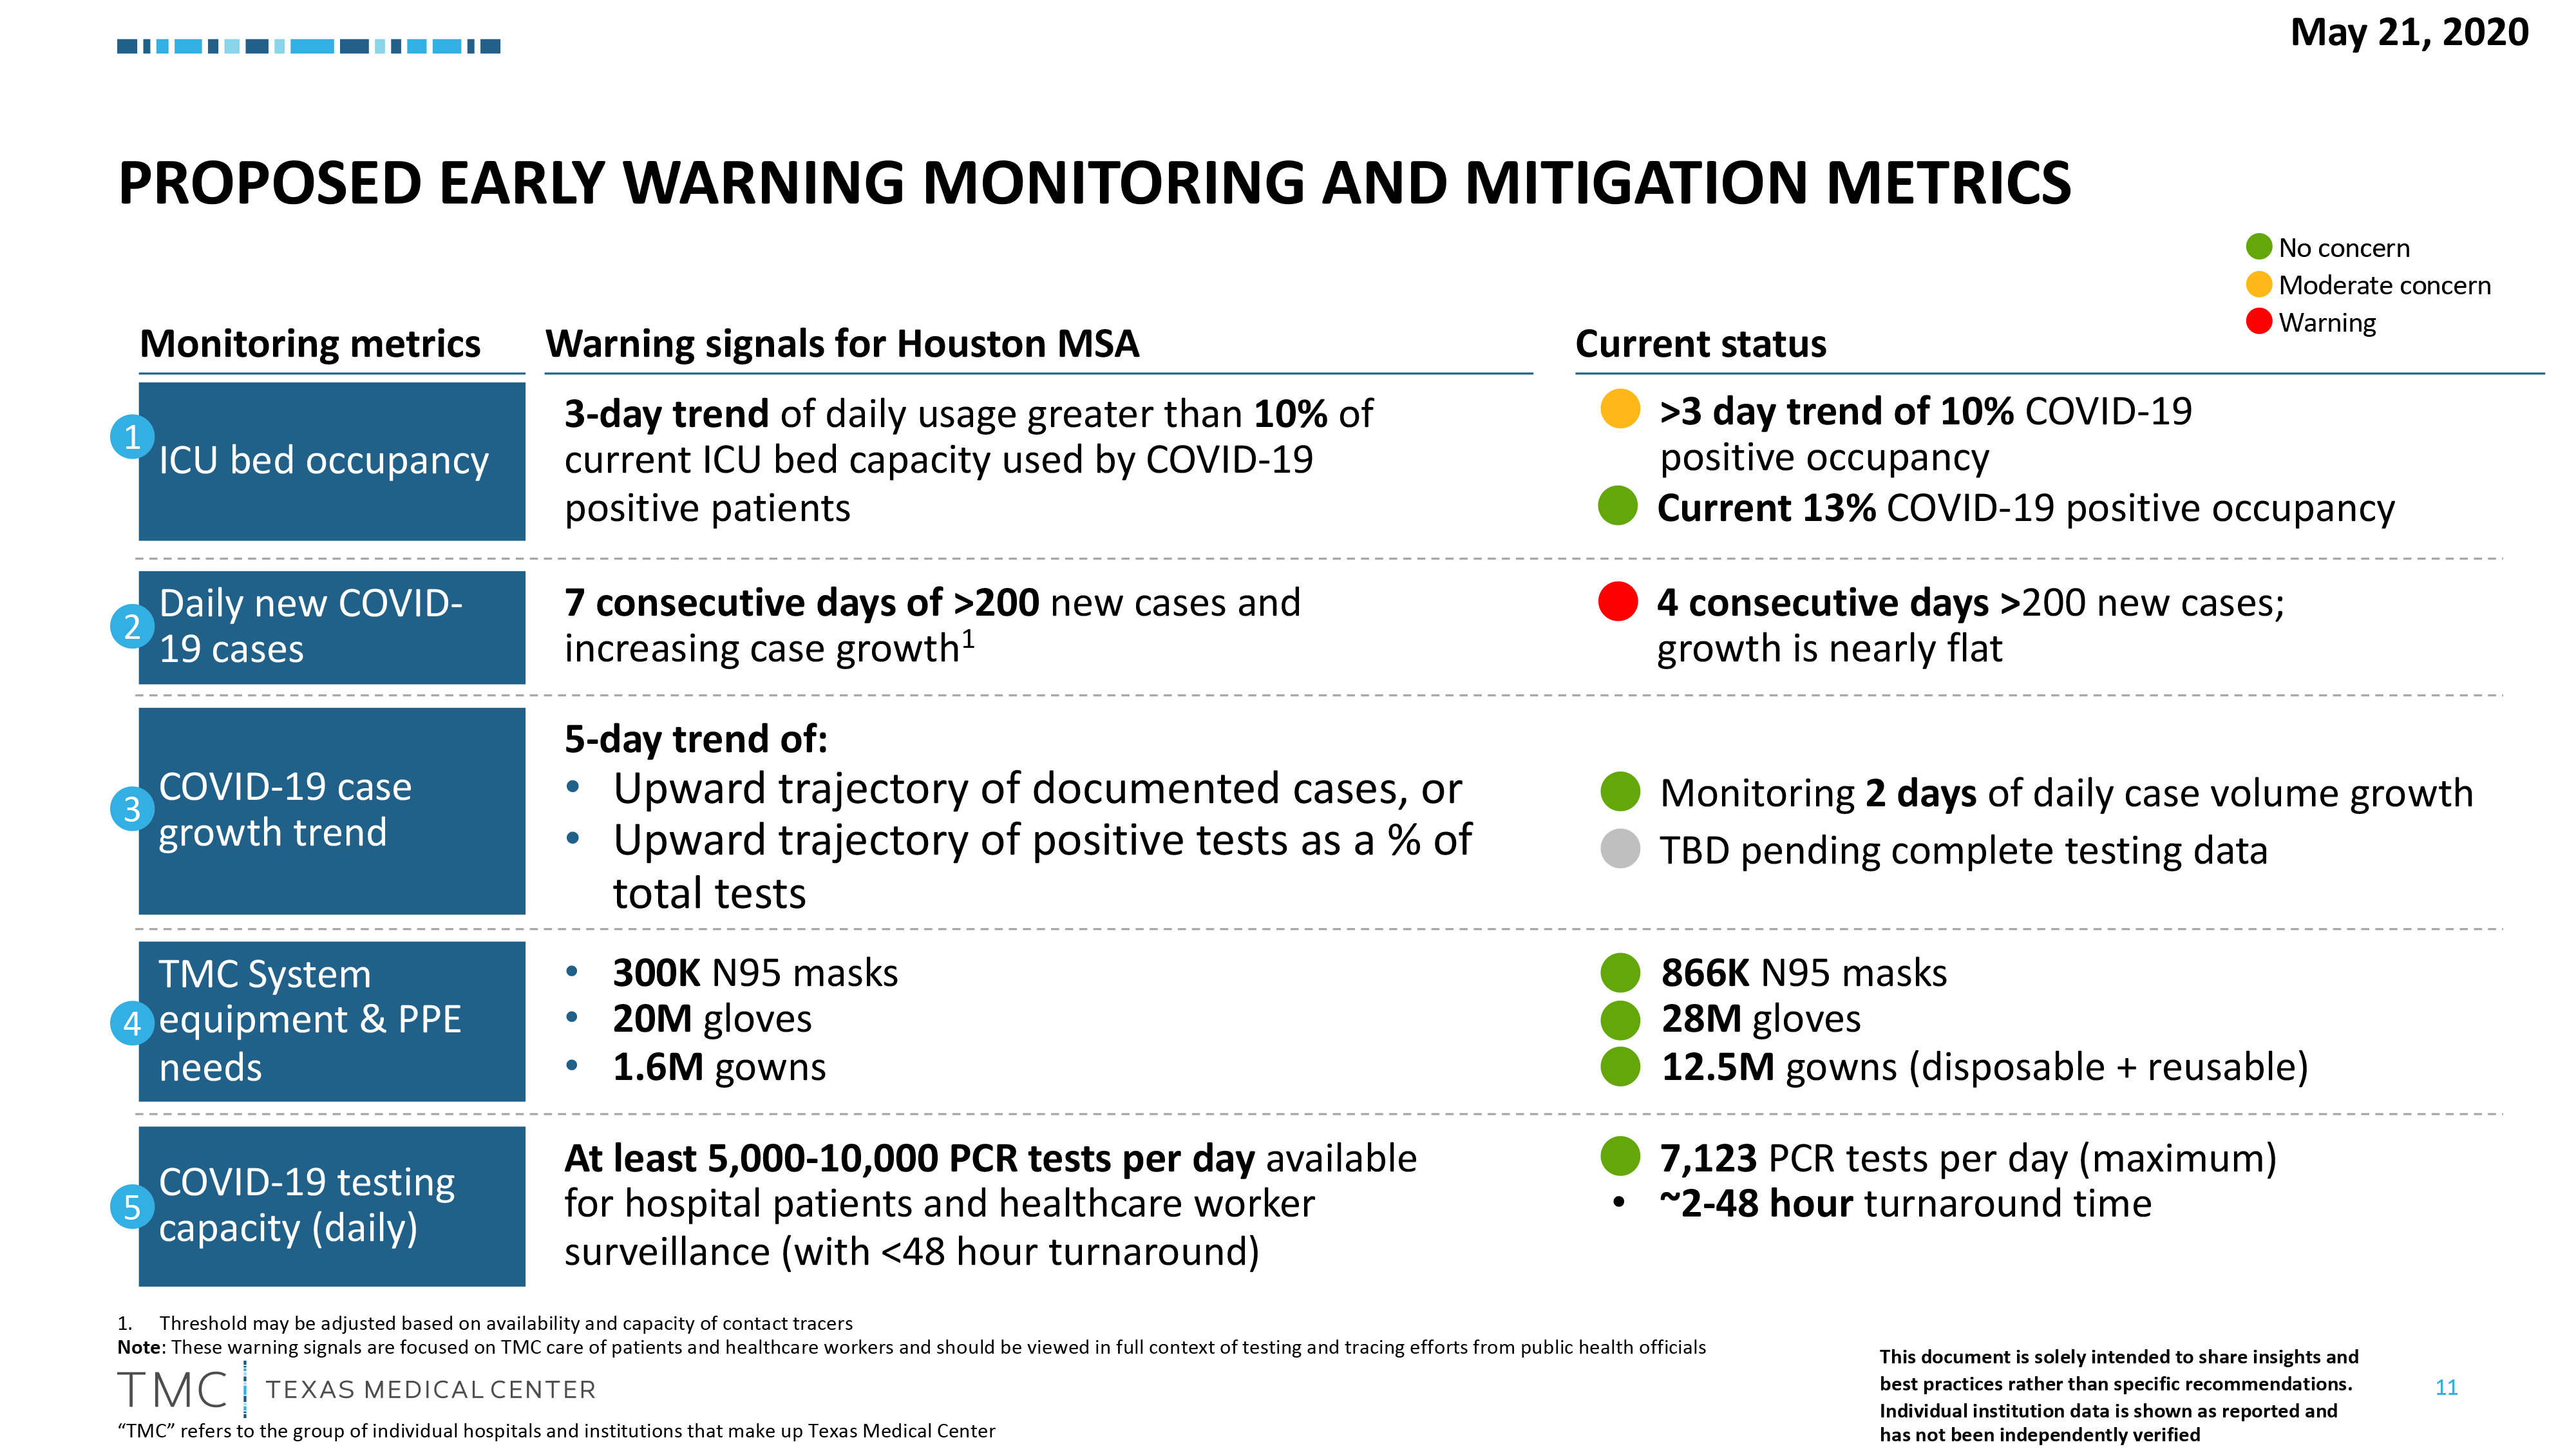 5-proposed-early-warning-monitoring-and-mitigation-metrics-5-22-2020.png